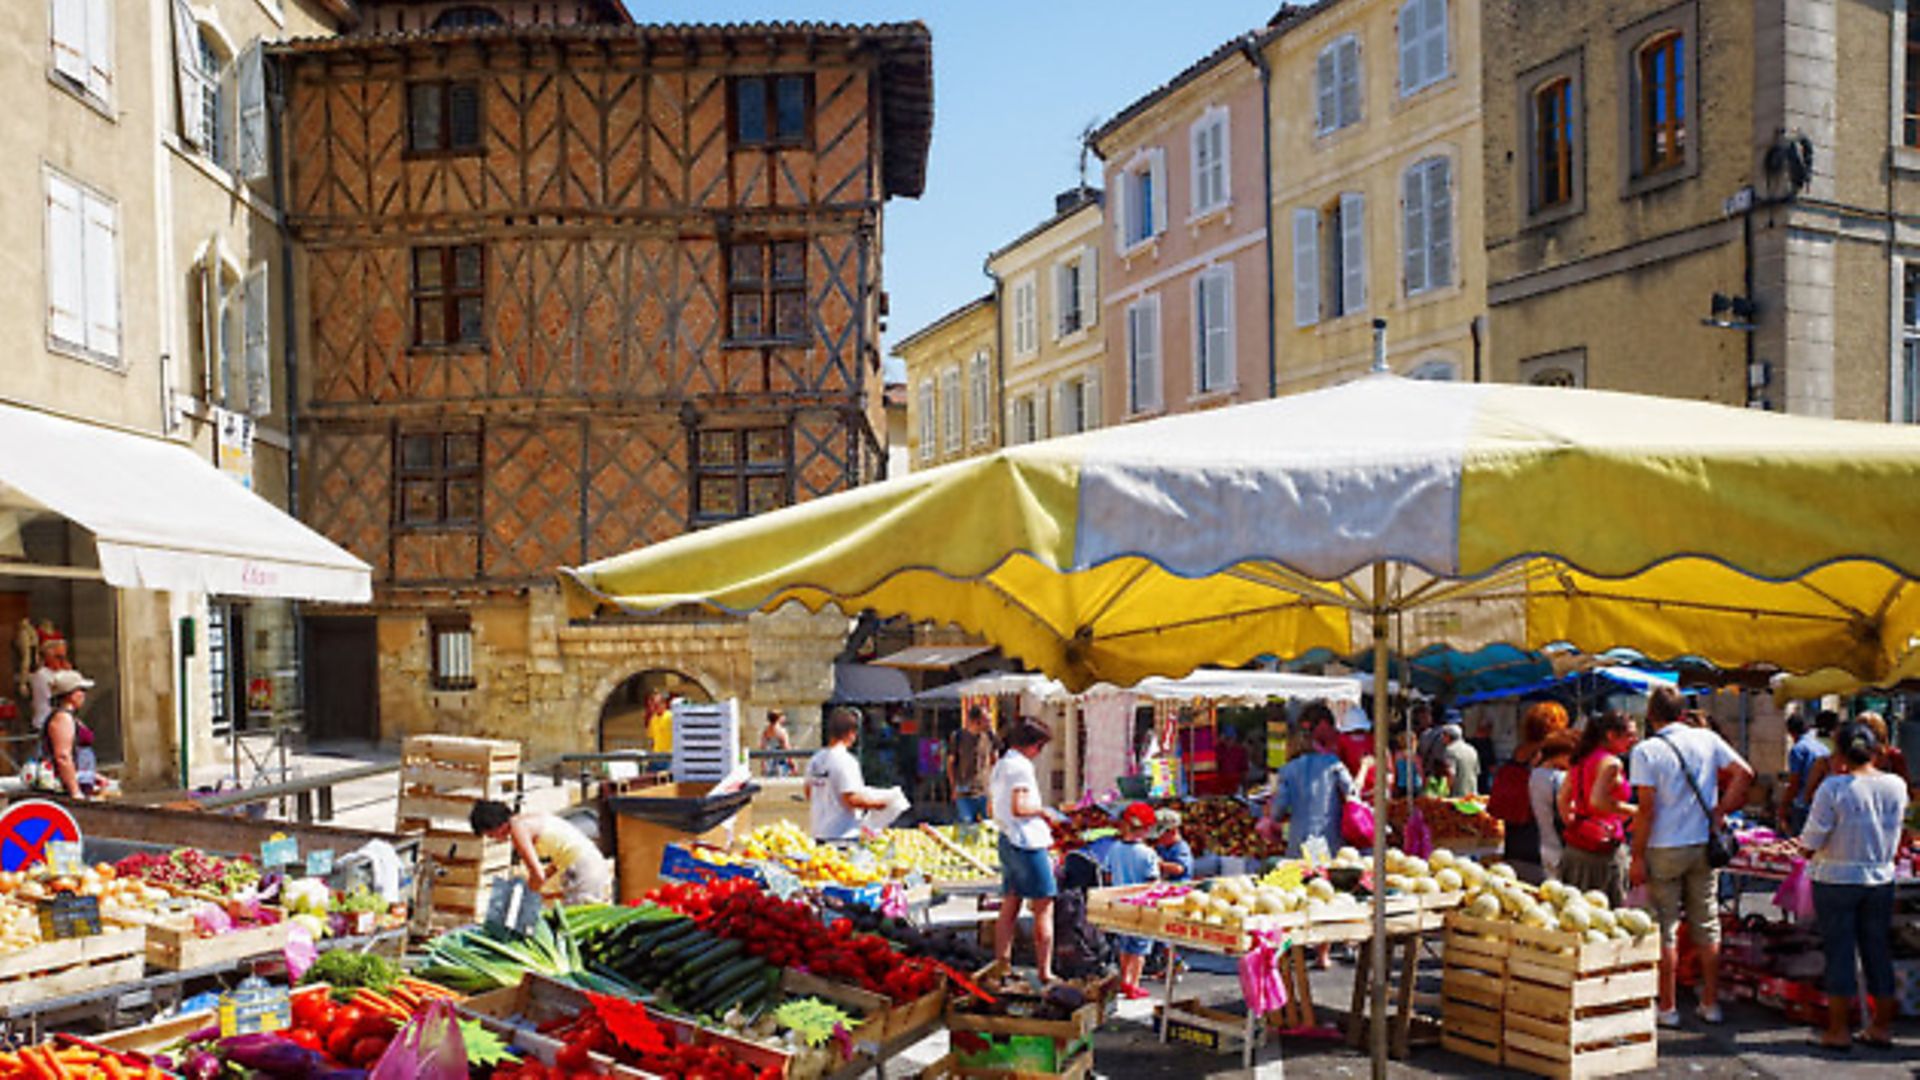 The enticing markets of south-west France - Complete France